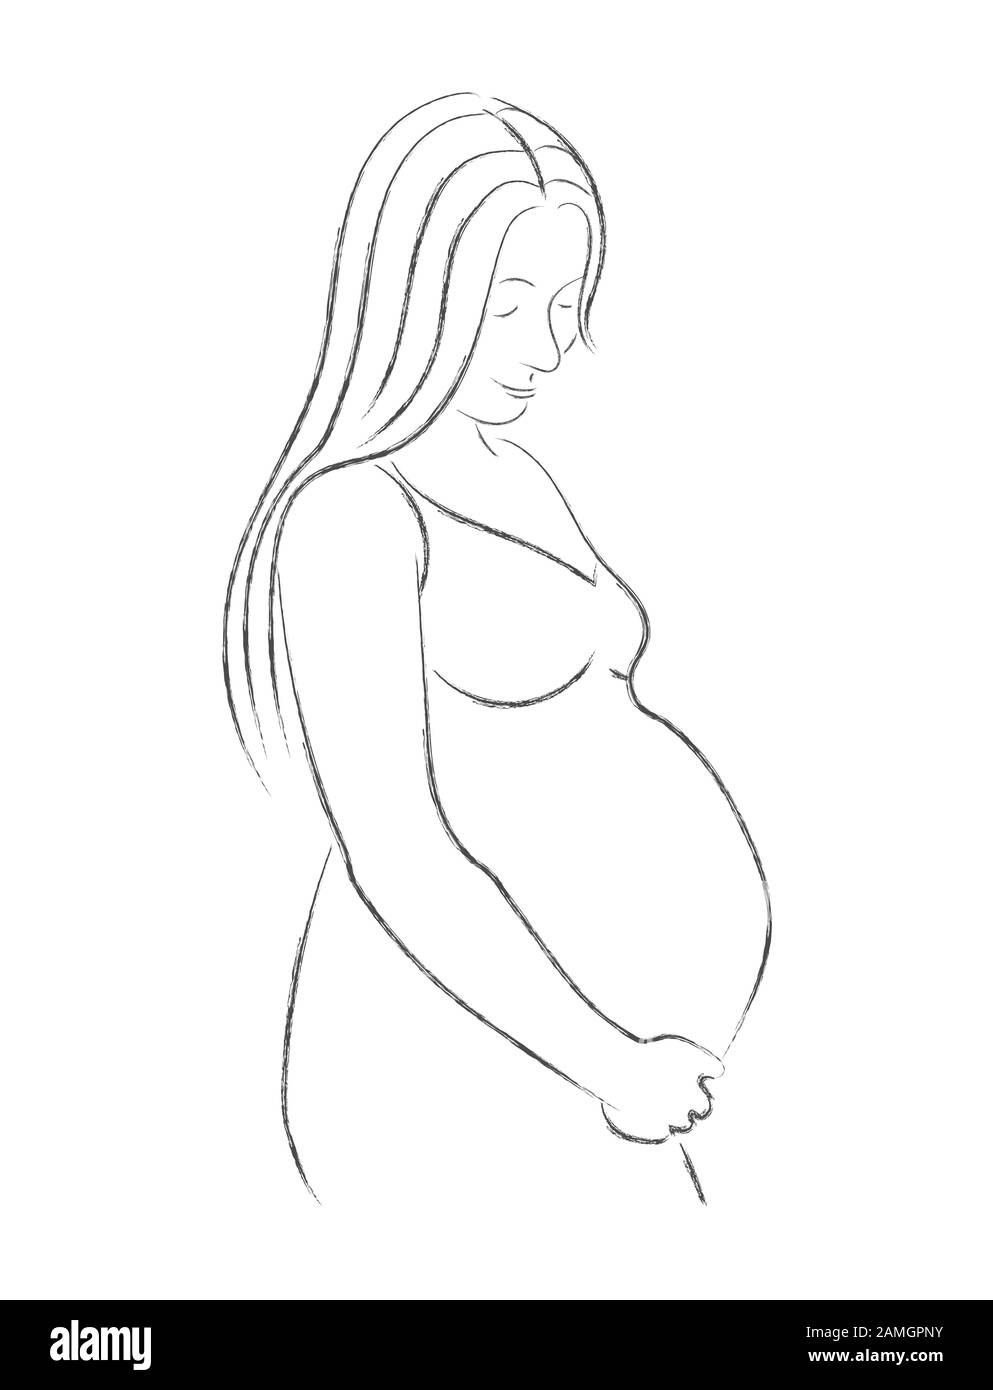 Vector pencil drawing of a pregnant woman. The pregnant woman bows her head and holds her stomach. Isolated on a white background. Stock Vector